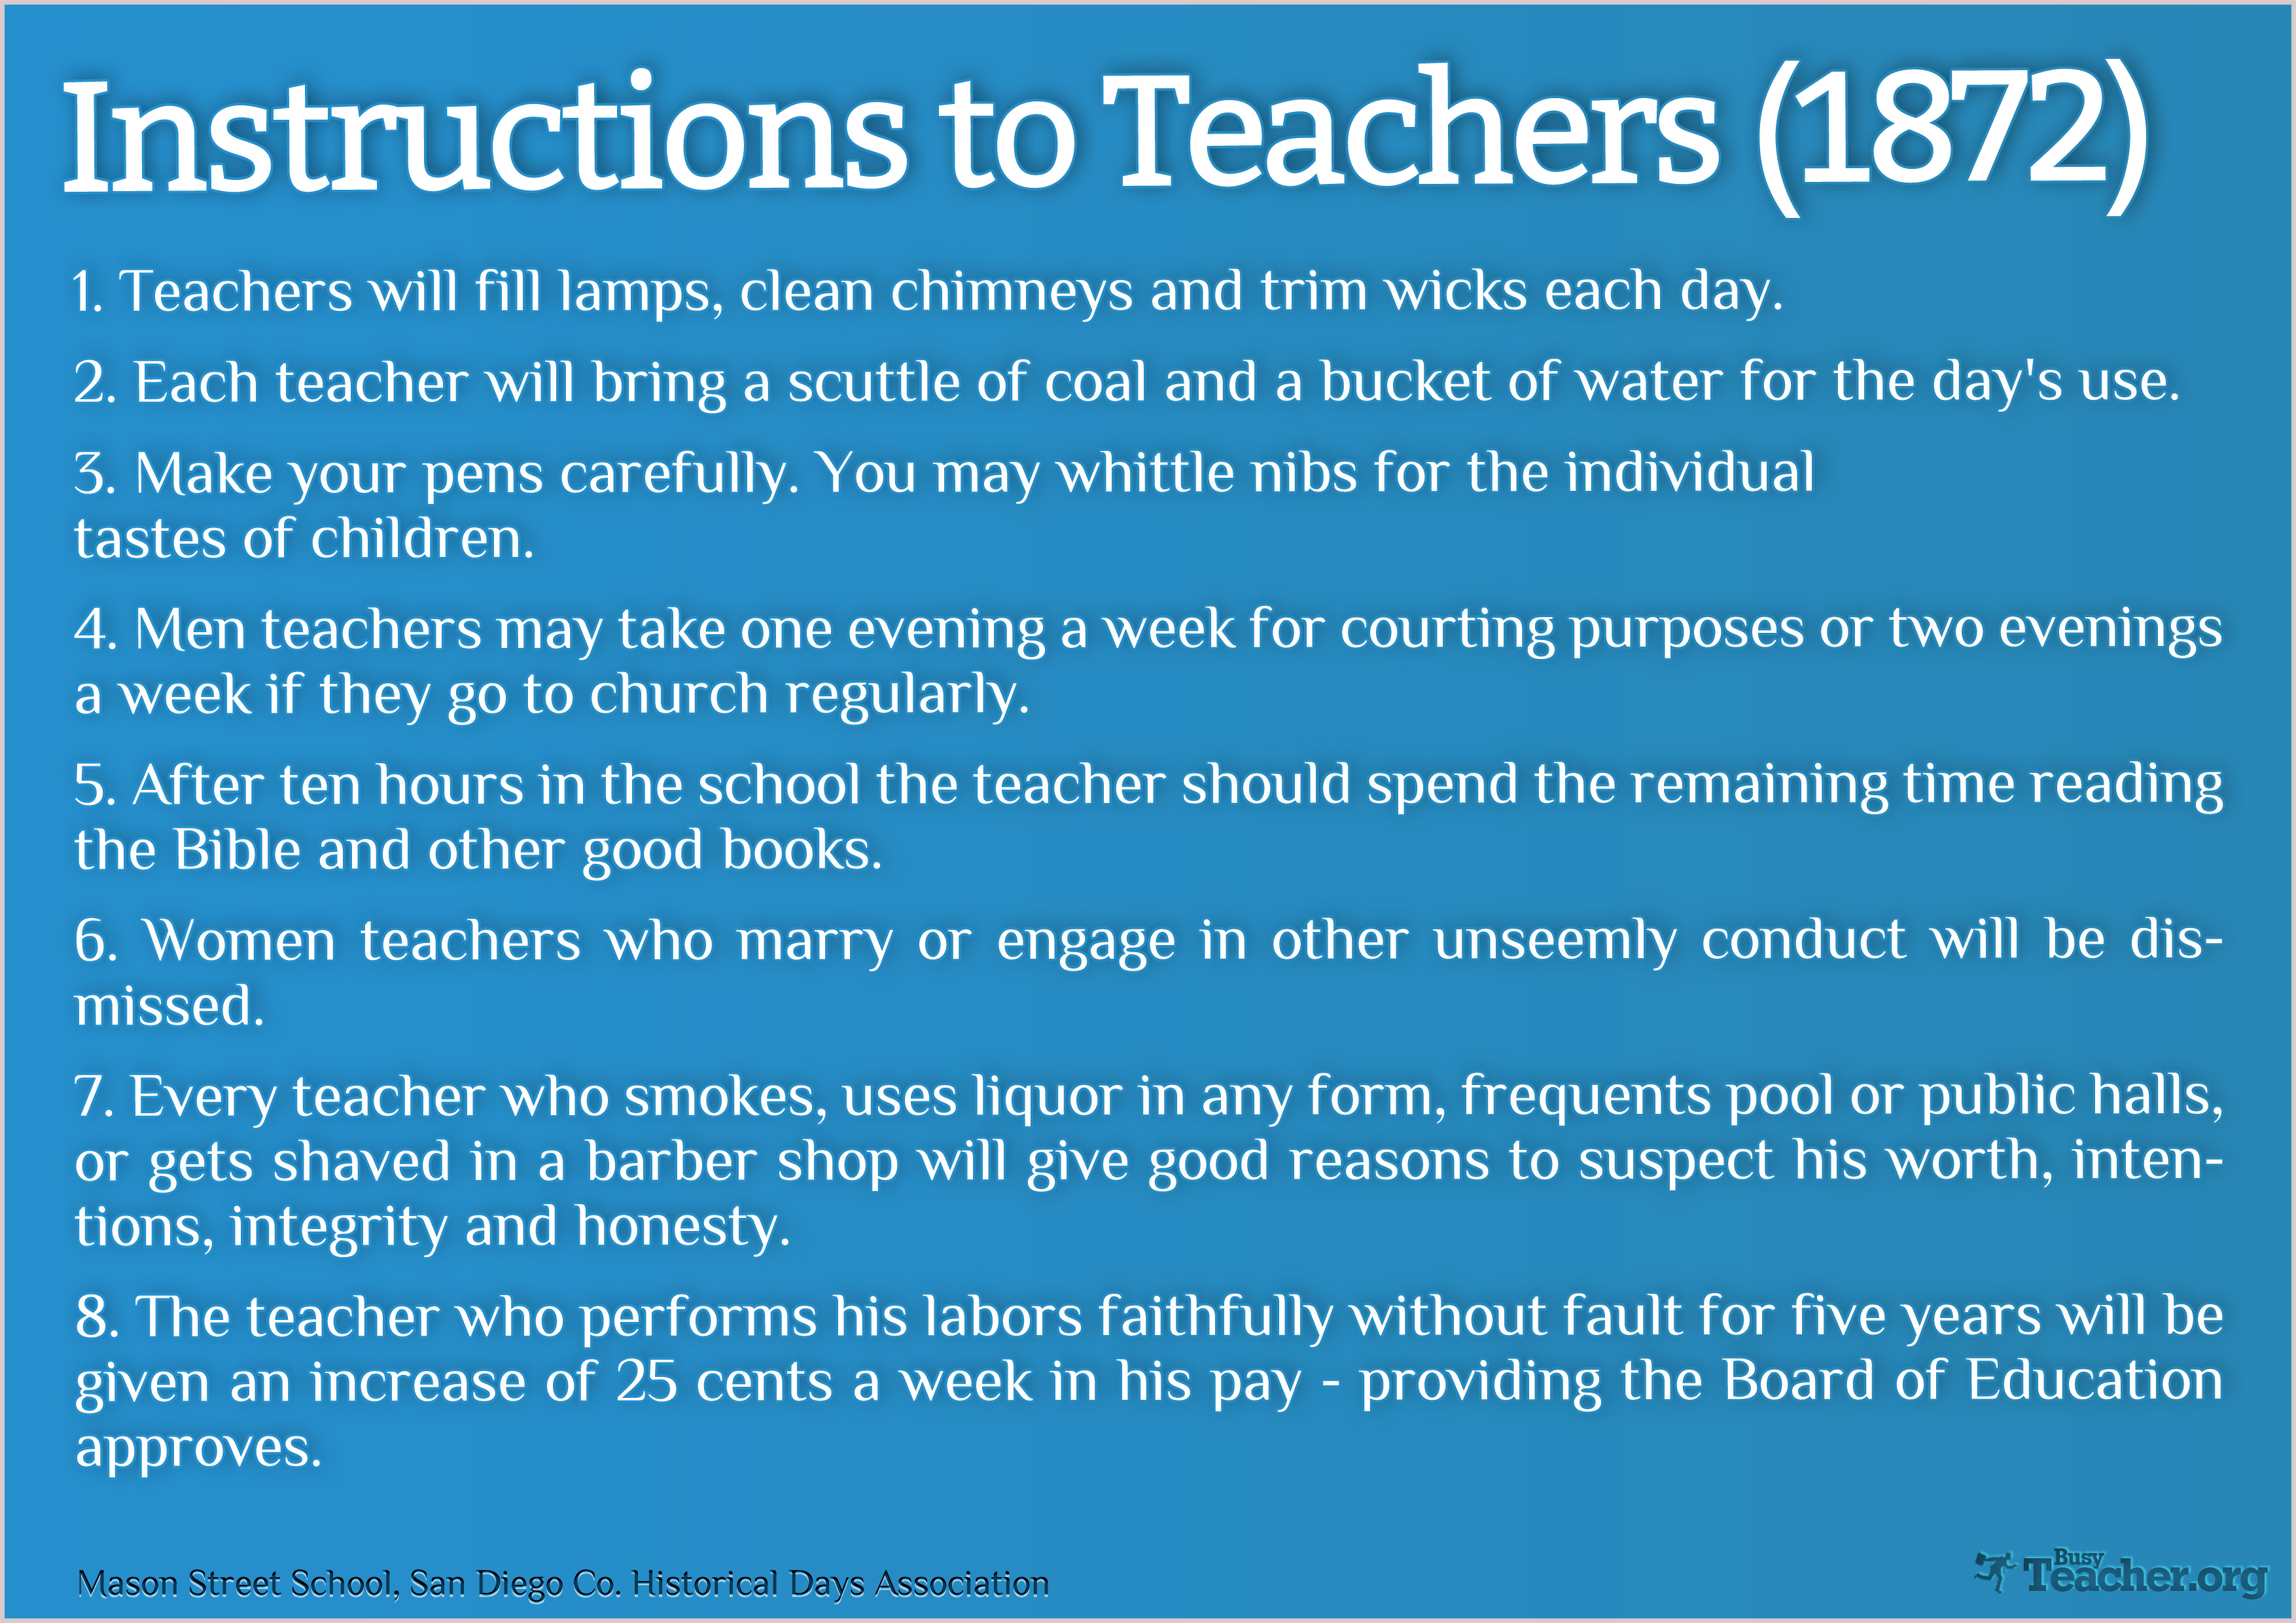 POSTER: Instructions To Teachers (1872)